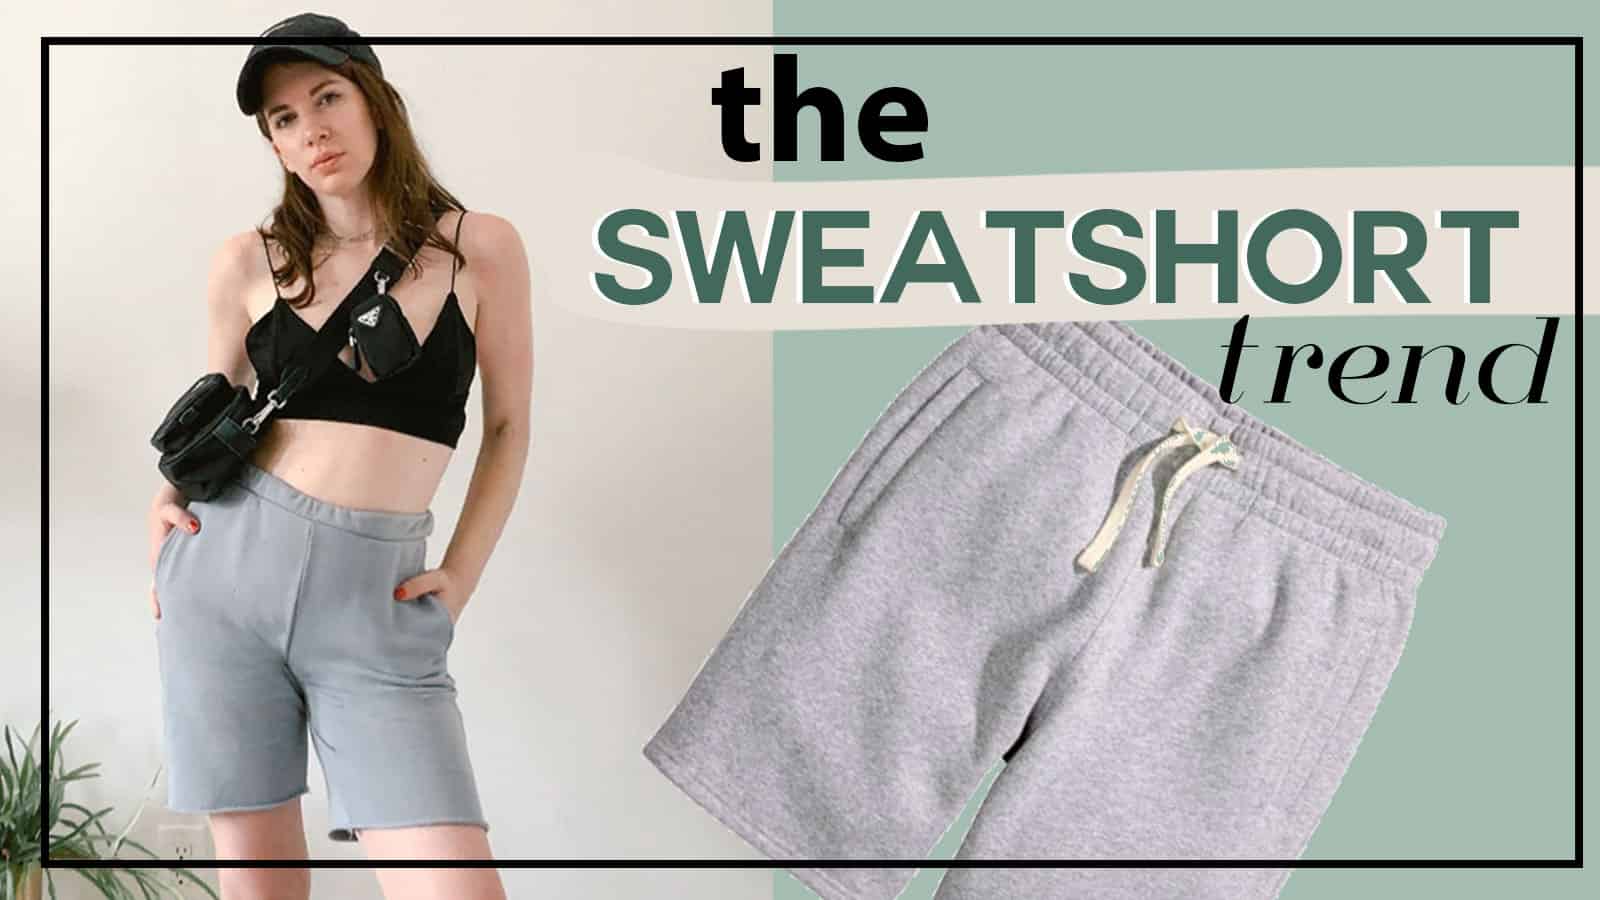 Sweatshorts solve all your fashion problems, here’s how to wear them